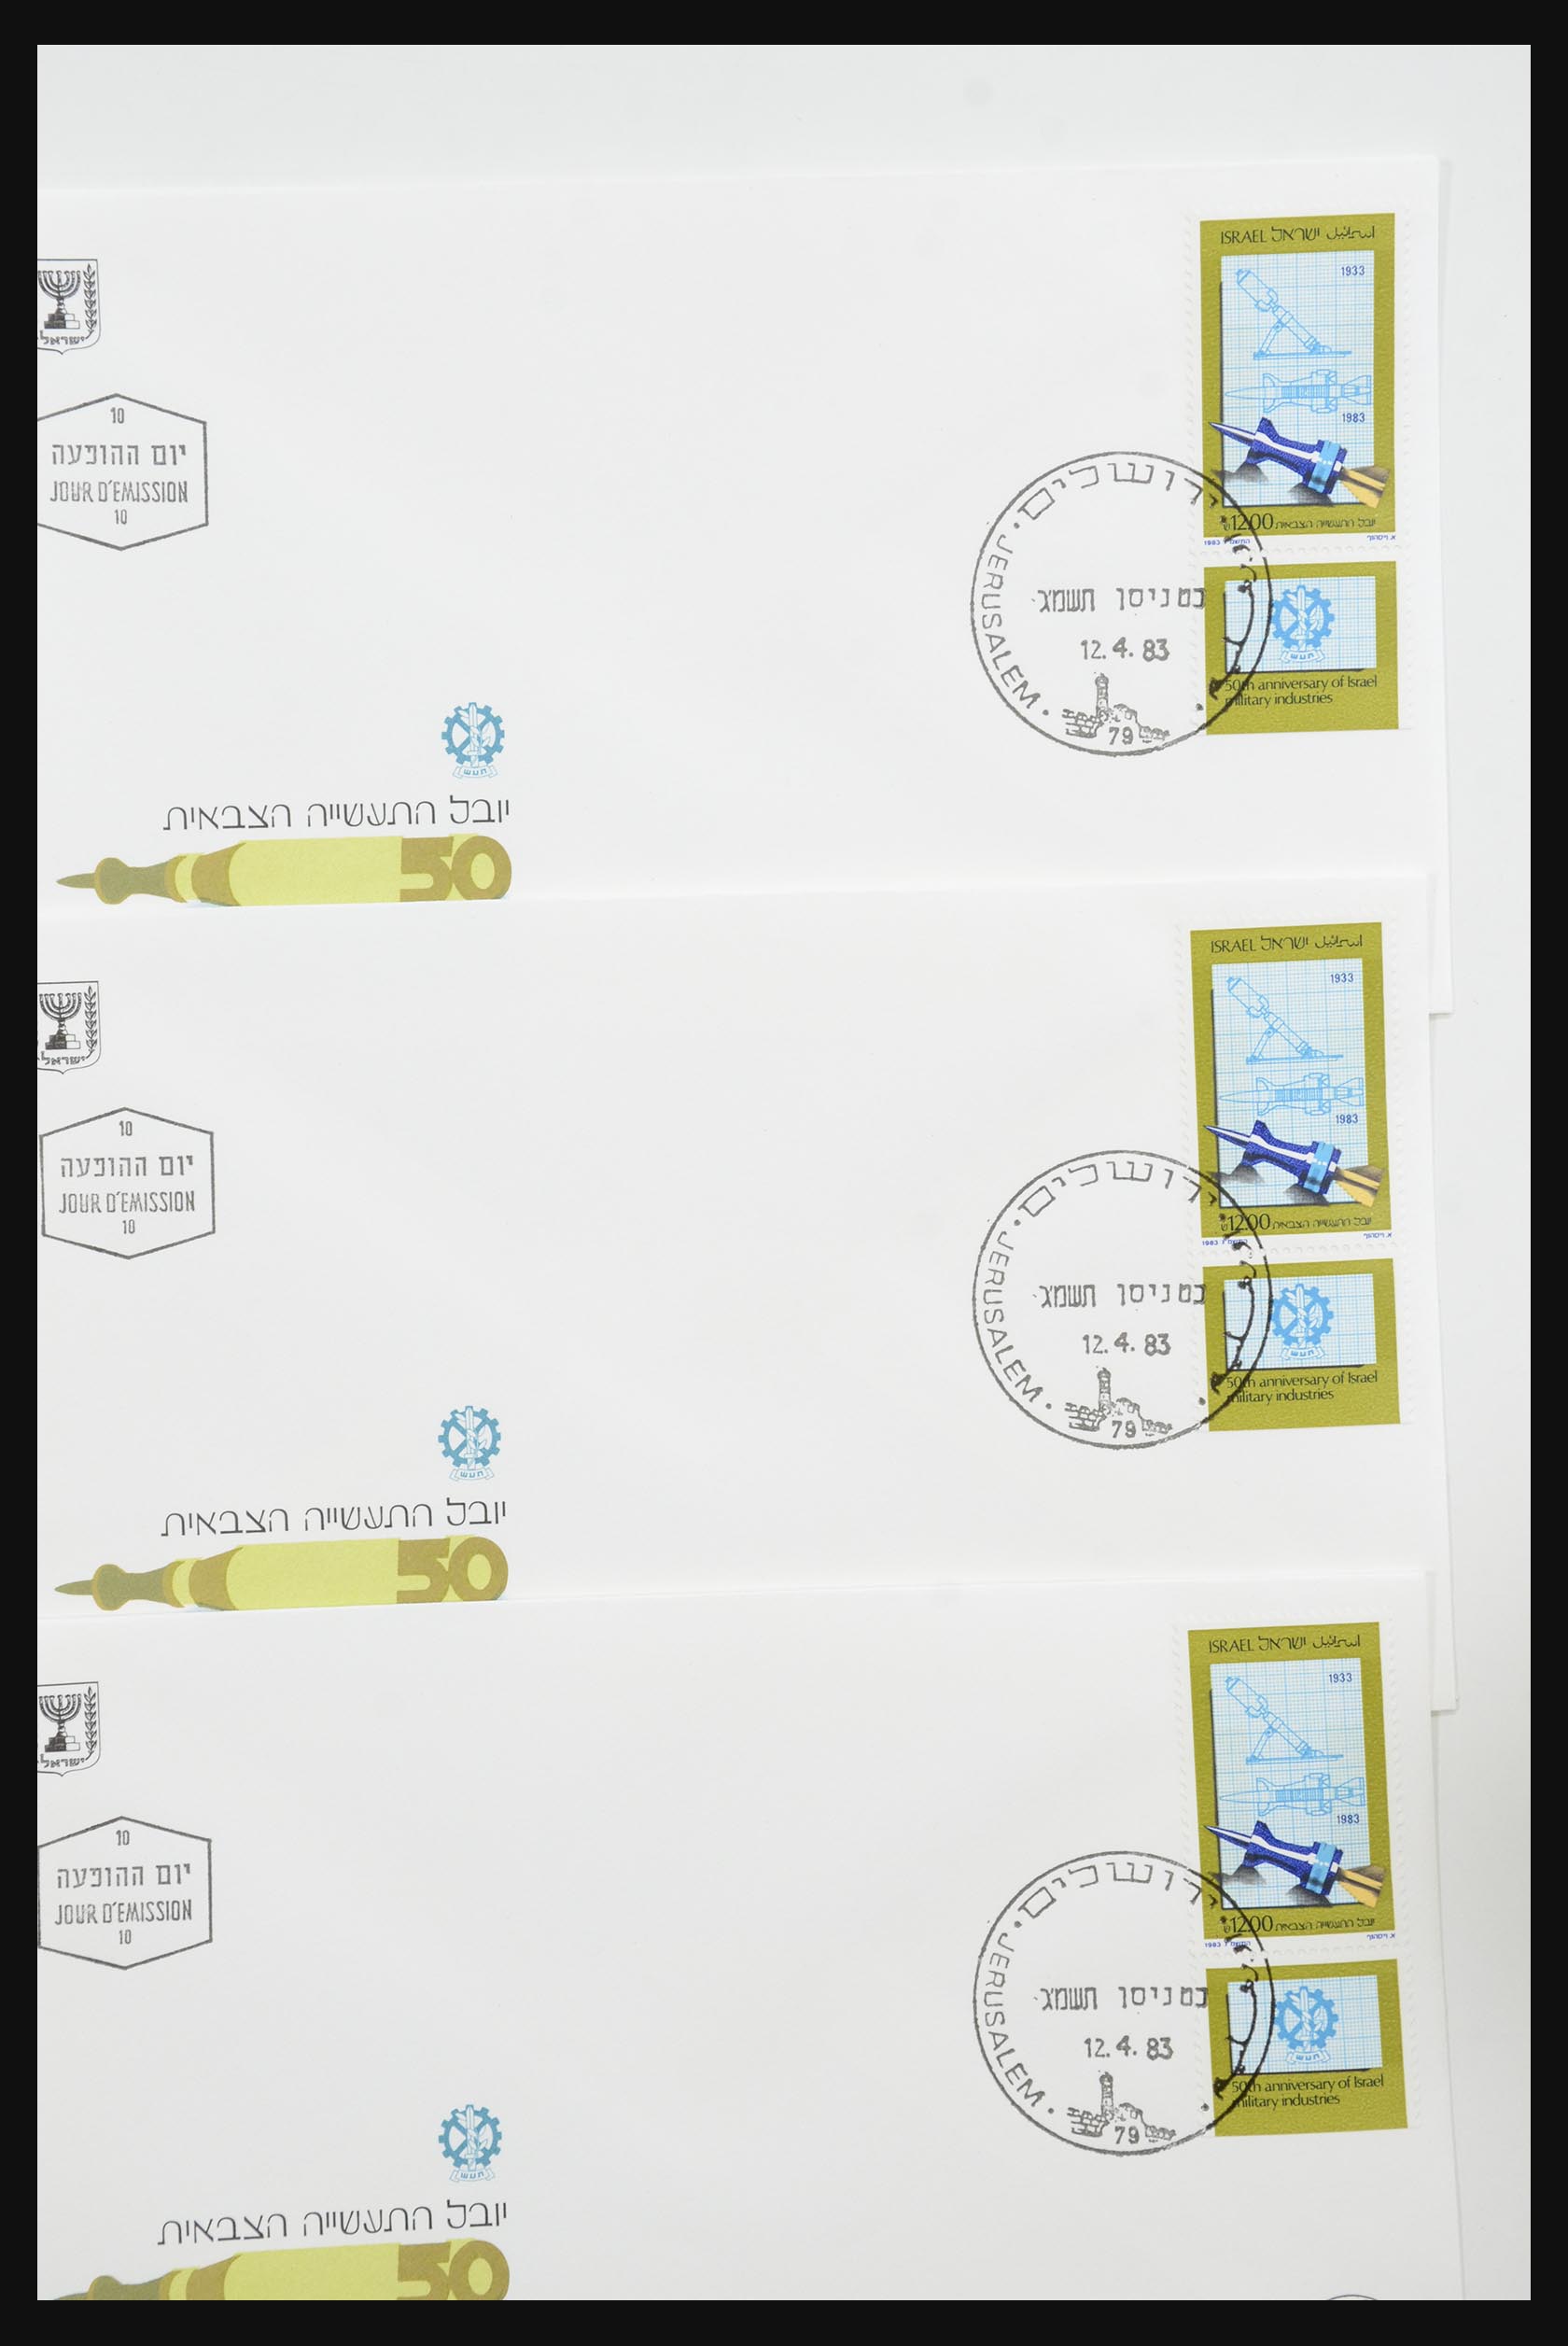 31924 014 - 31924 Israel first day cover collection 1957-2003.